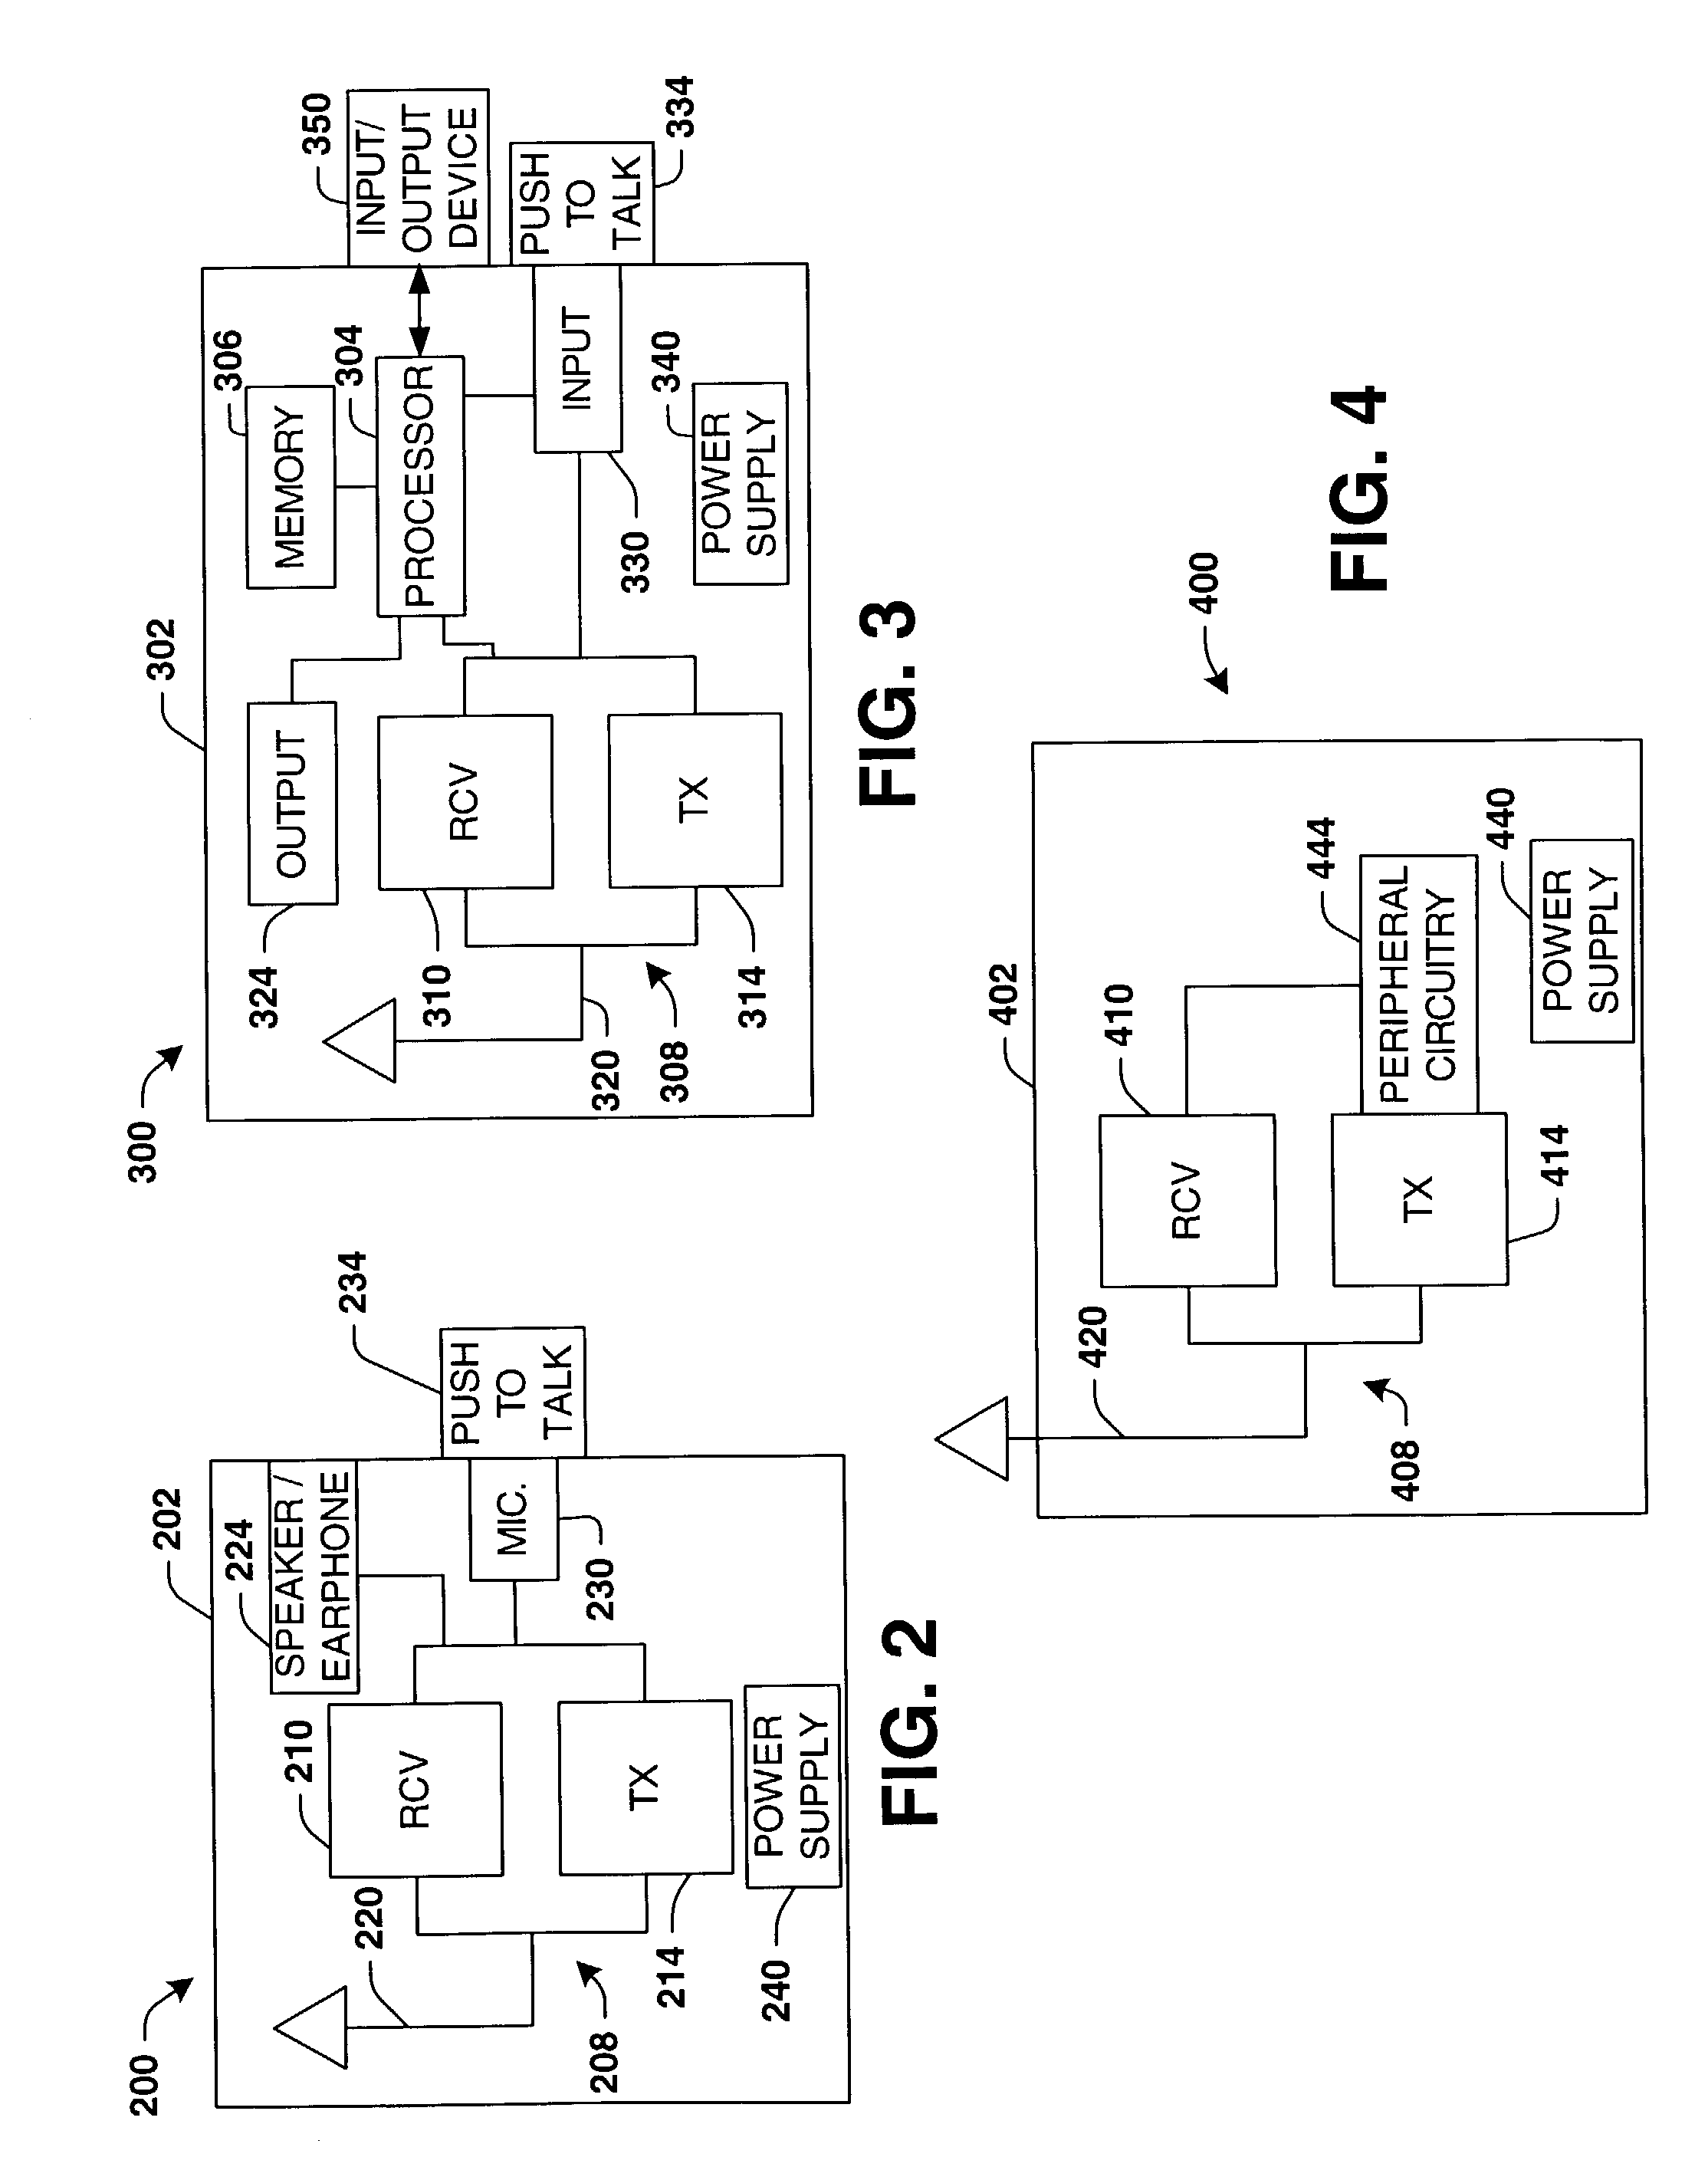 Communication system with mobile coverage area